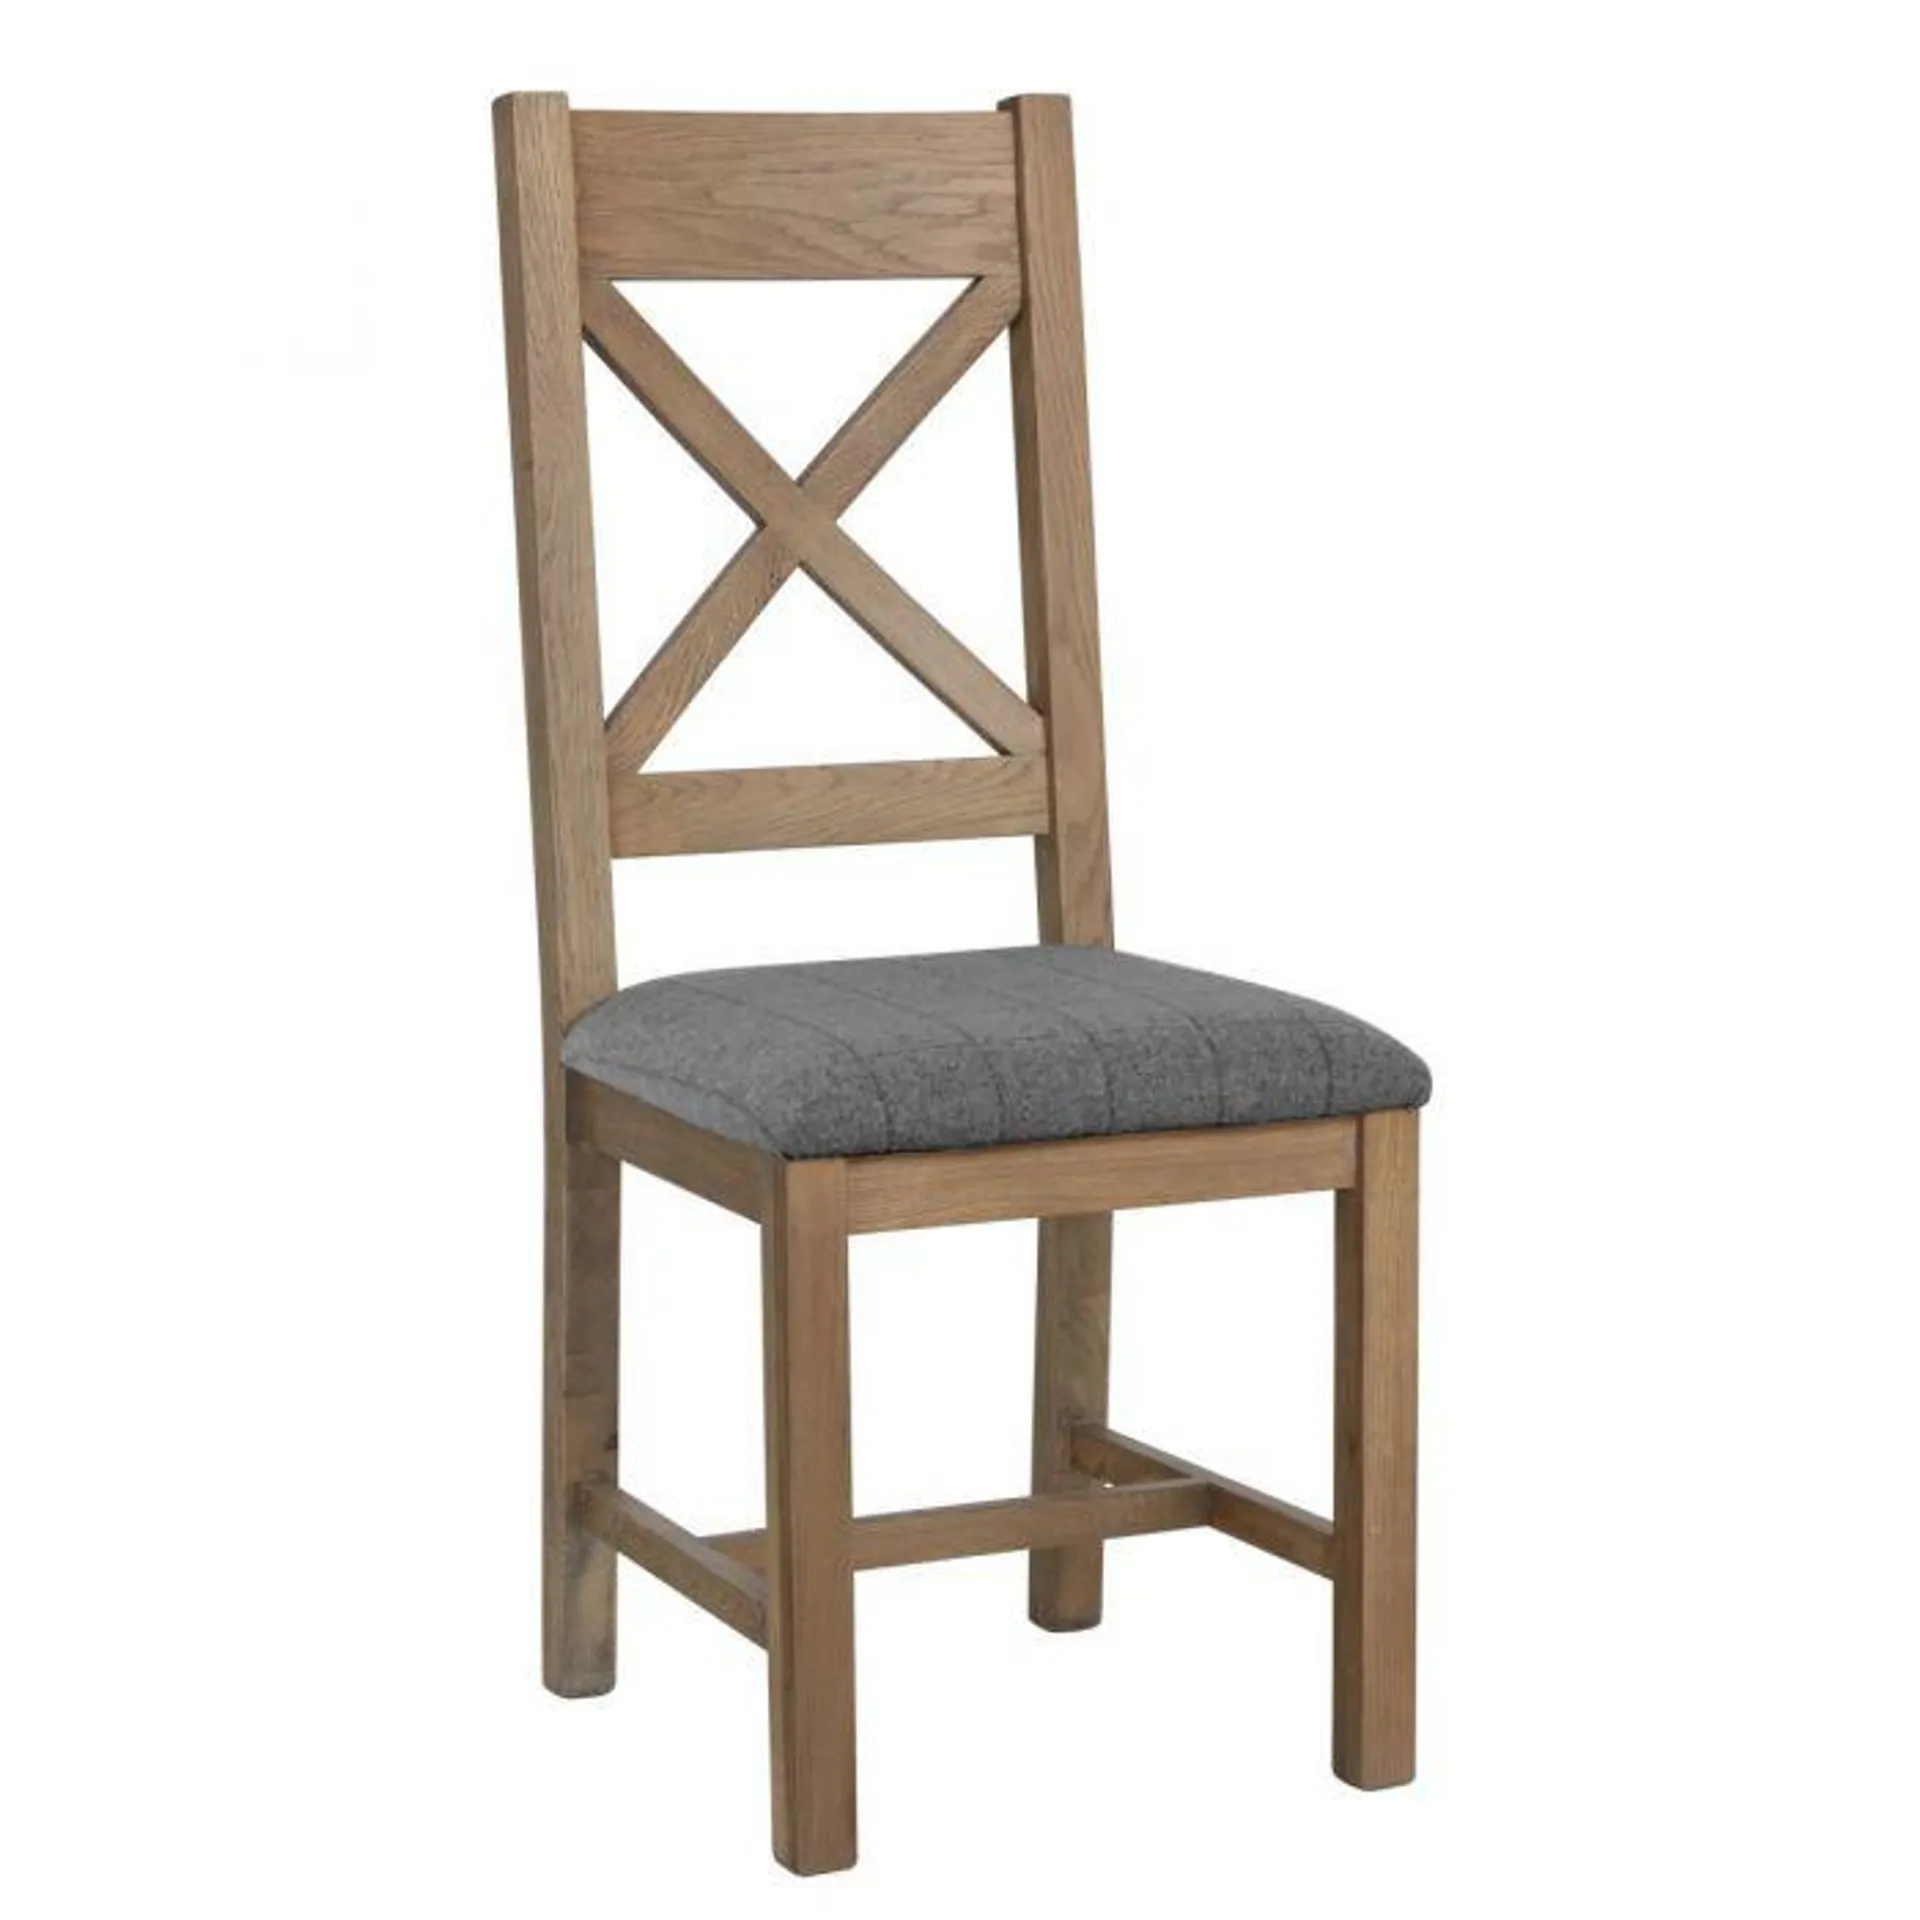 Heritage Oak Cross Back Dining Chair - Grey Check